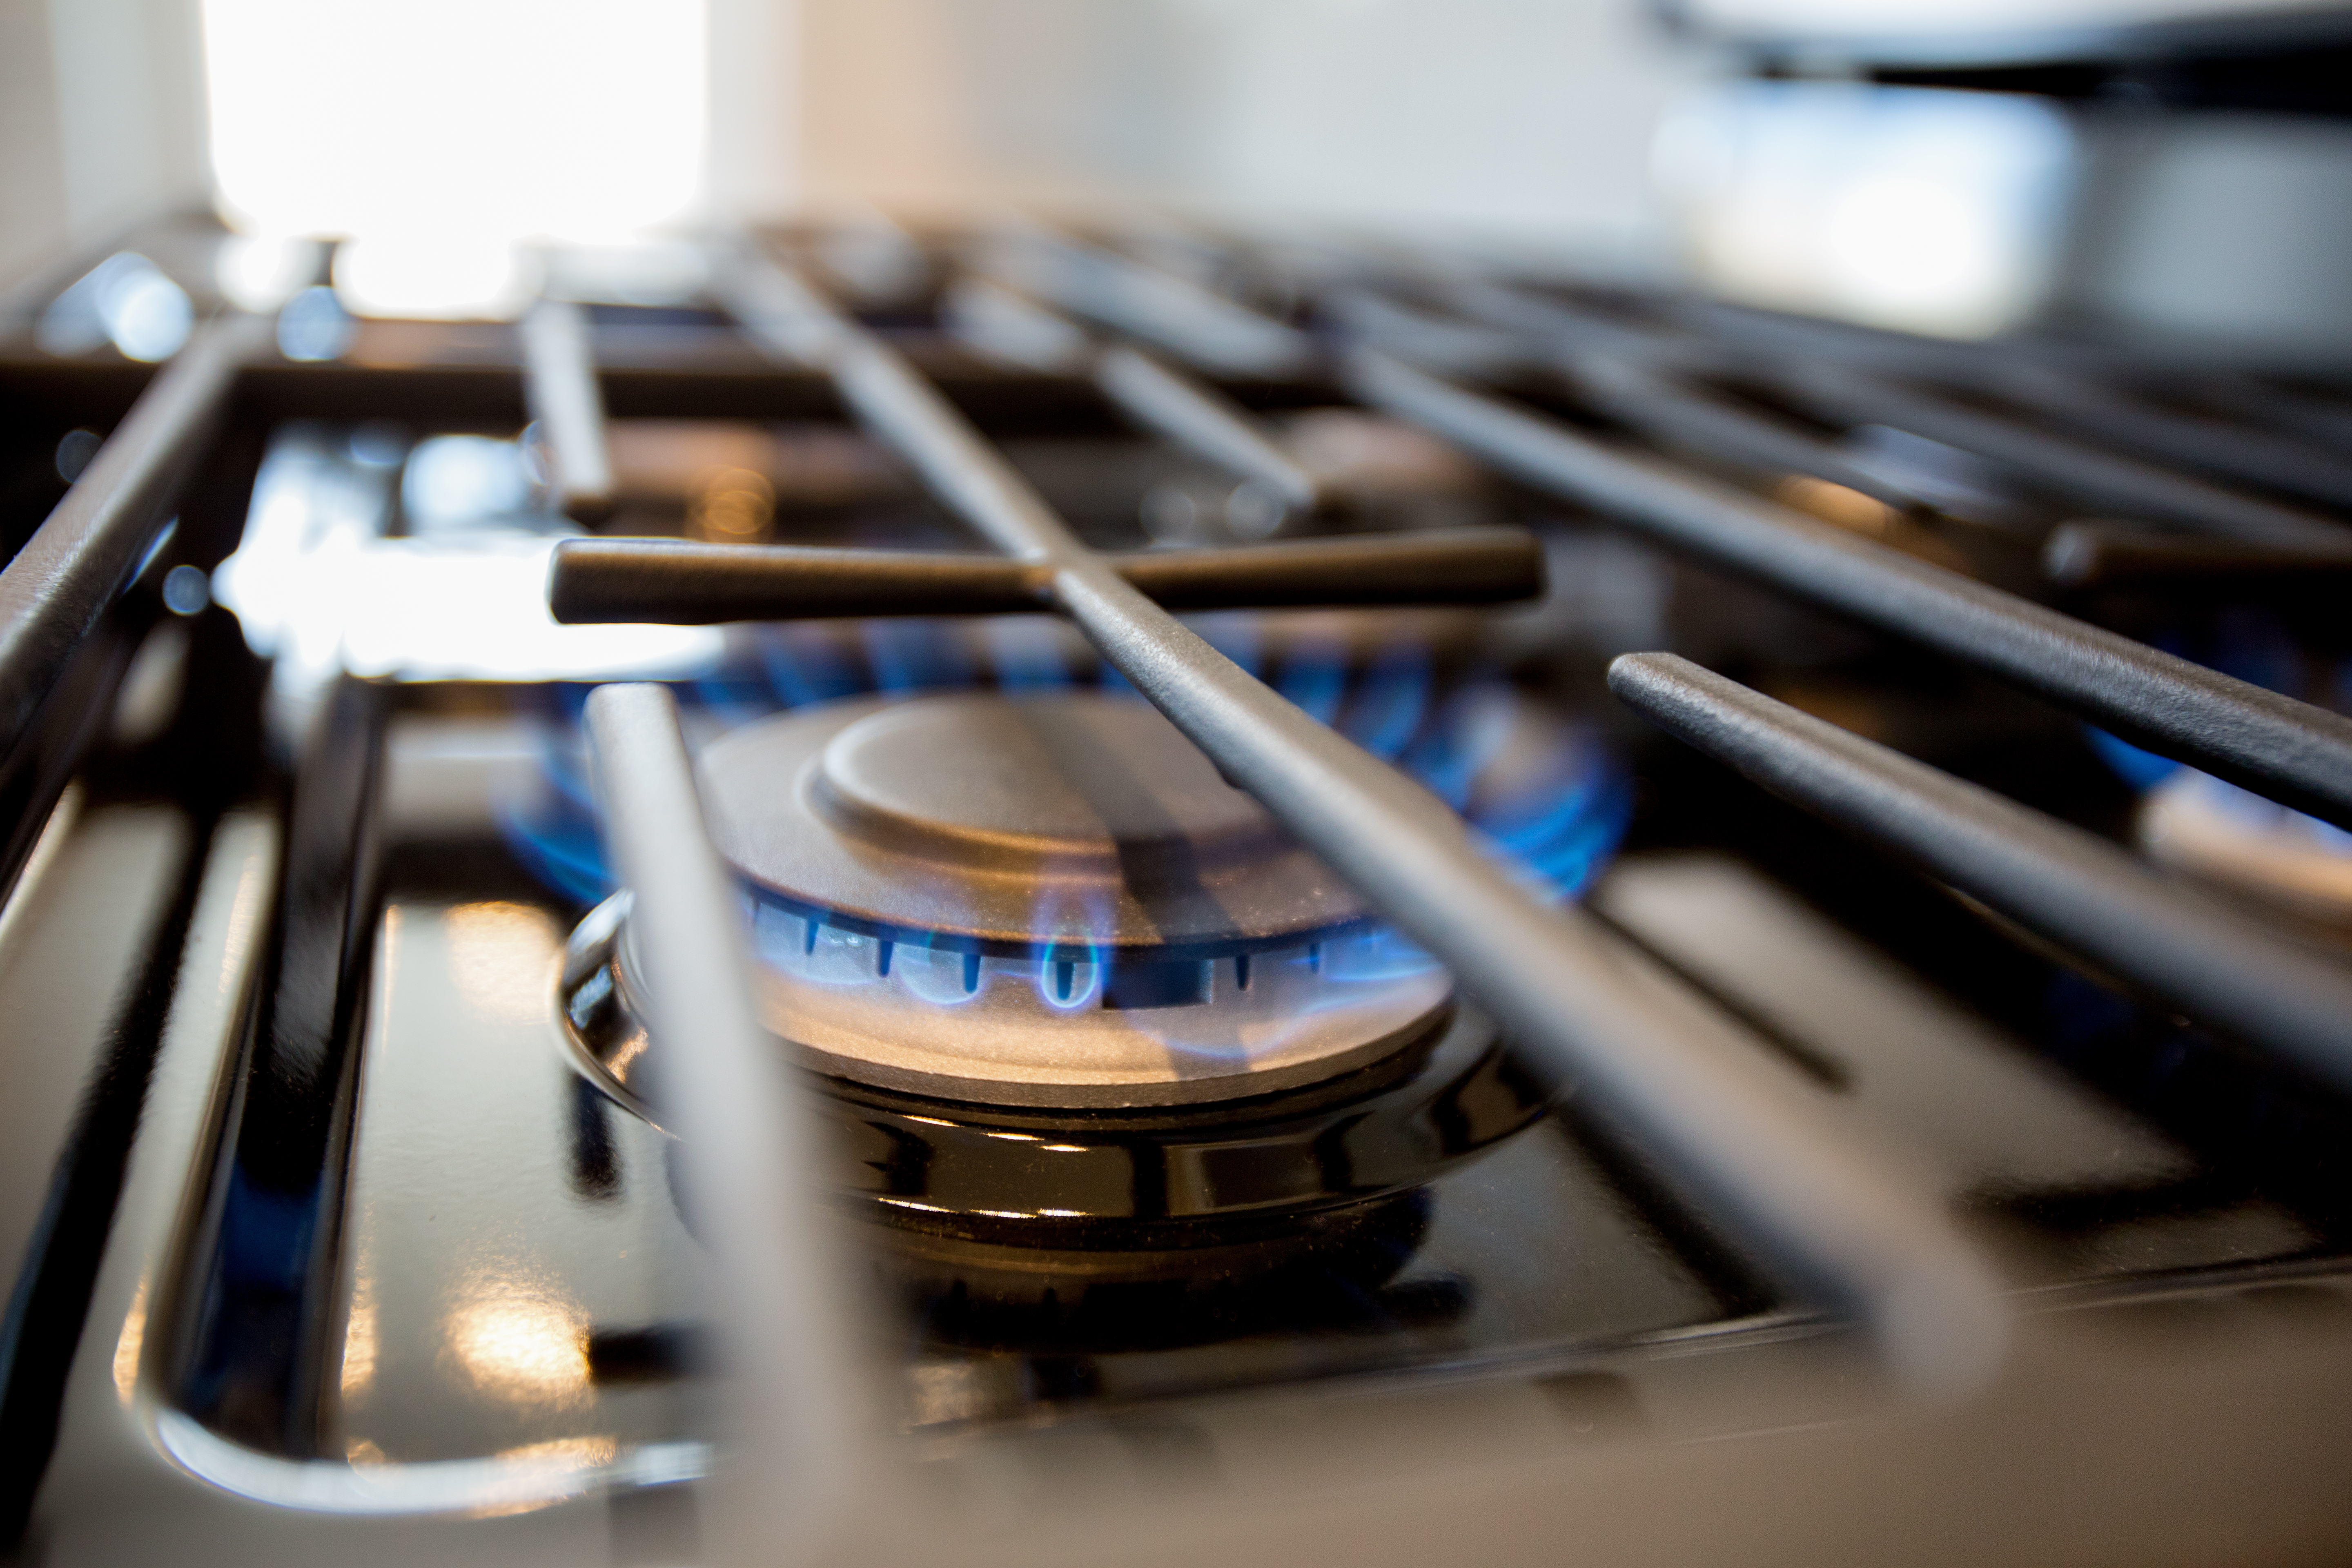 5 Reasons Why Your Electric Cook-top Burners Won't Get Hot